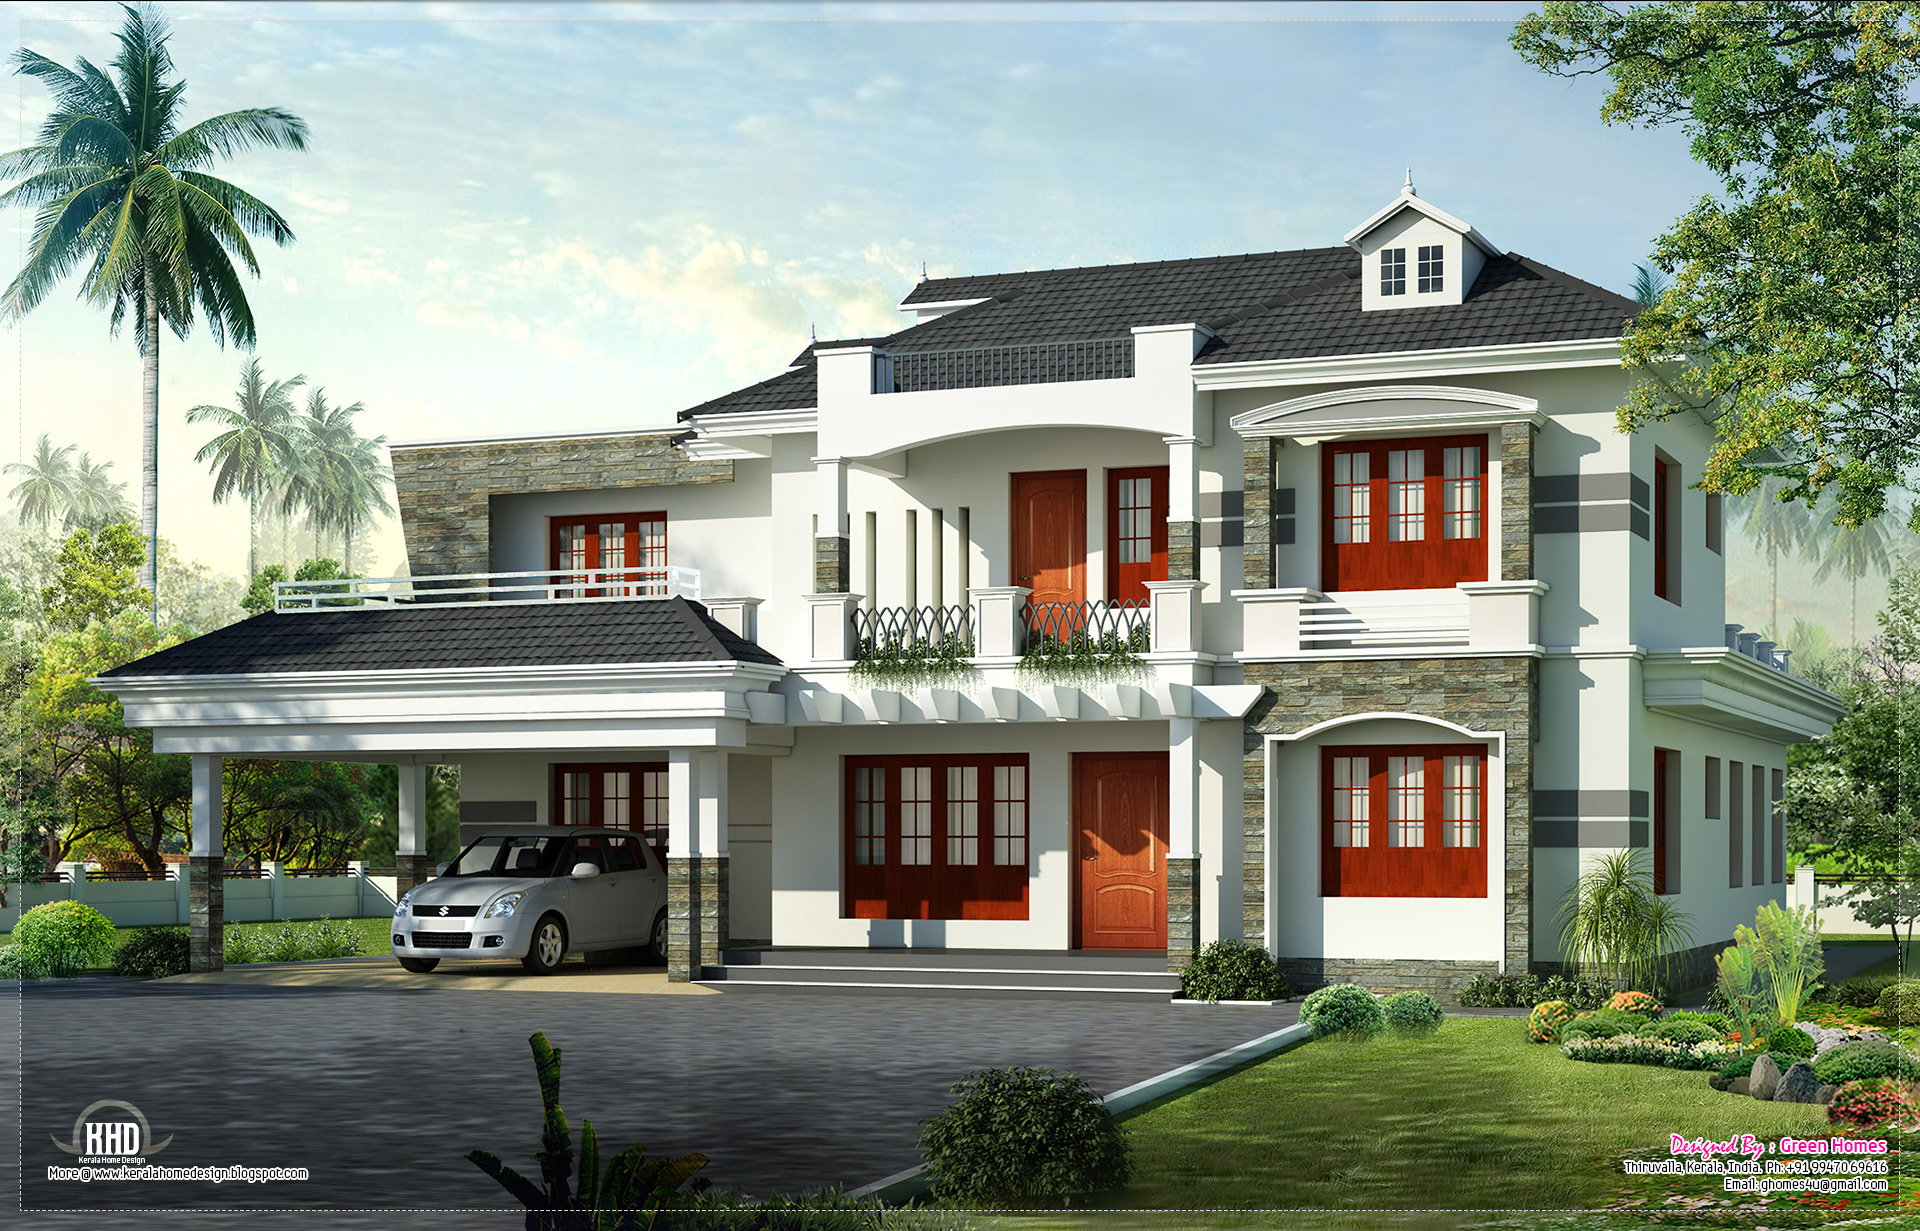 New house plans. New Design Home. India Home Design. One storey Houses Plans. Дом проекта Newhouse 726.